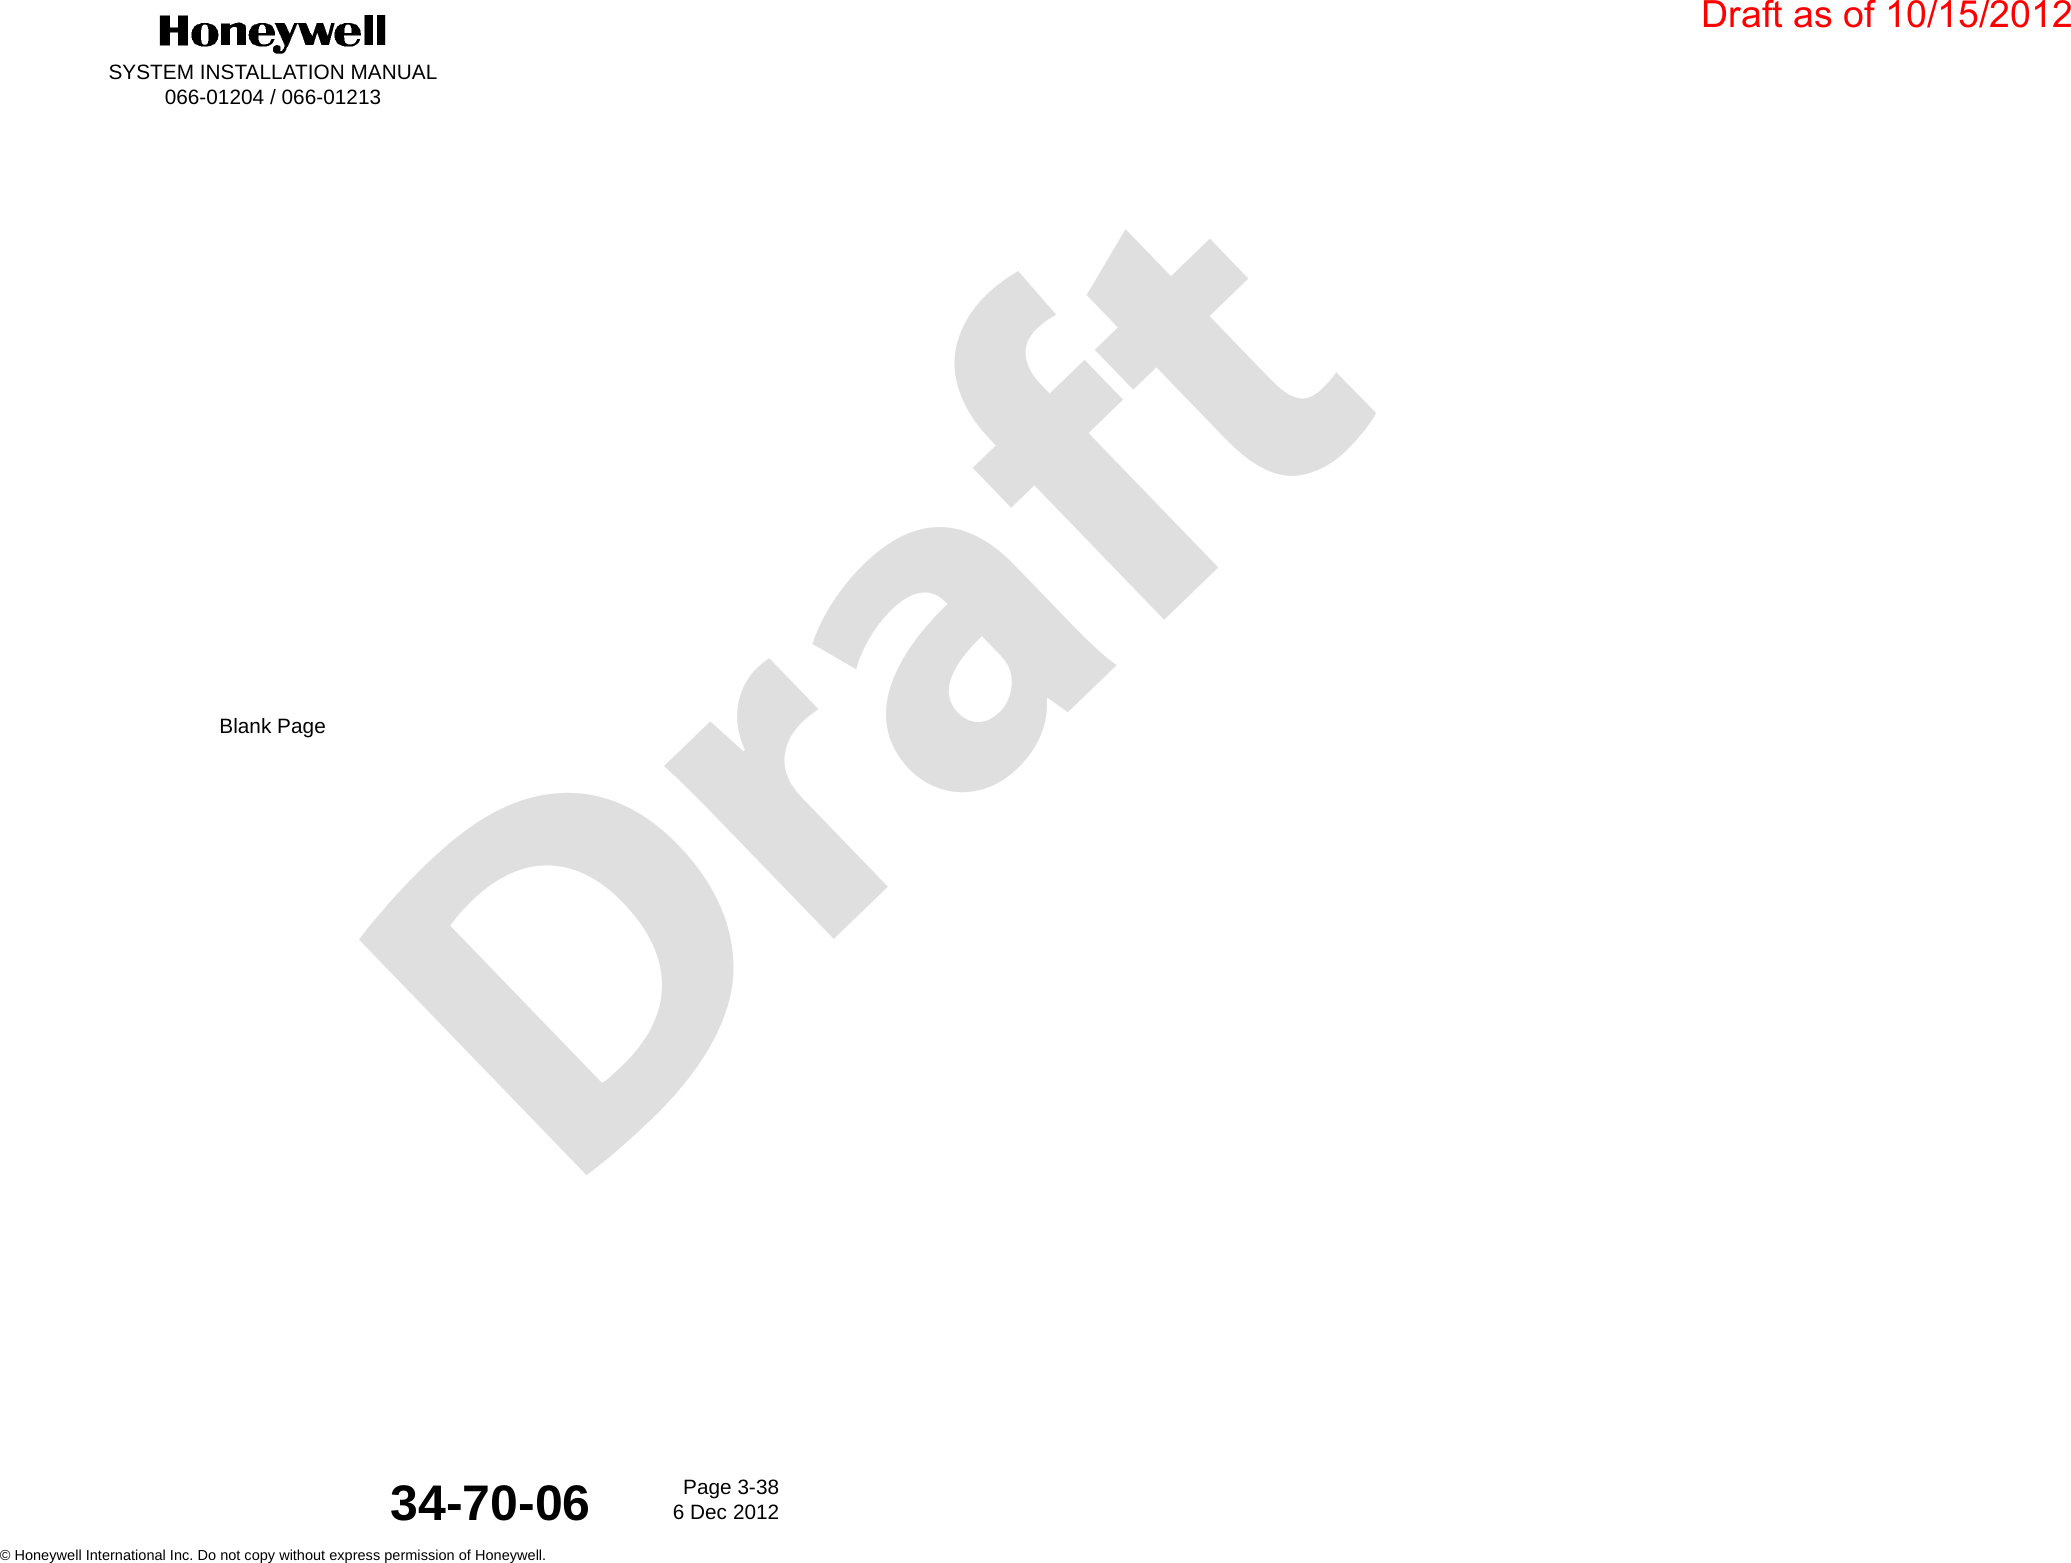 DraftSYSTEM INSTALLATION MANUAL066-01204 / 066-01213Page 3-386 Dec 2012© Honeywell International Inc. Do not copy without express permission of Honeywell.34-70-06Blank PageDraft as of 10/15/2012